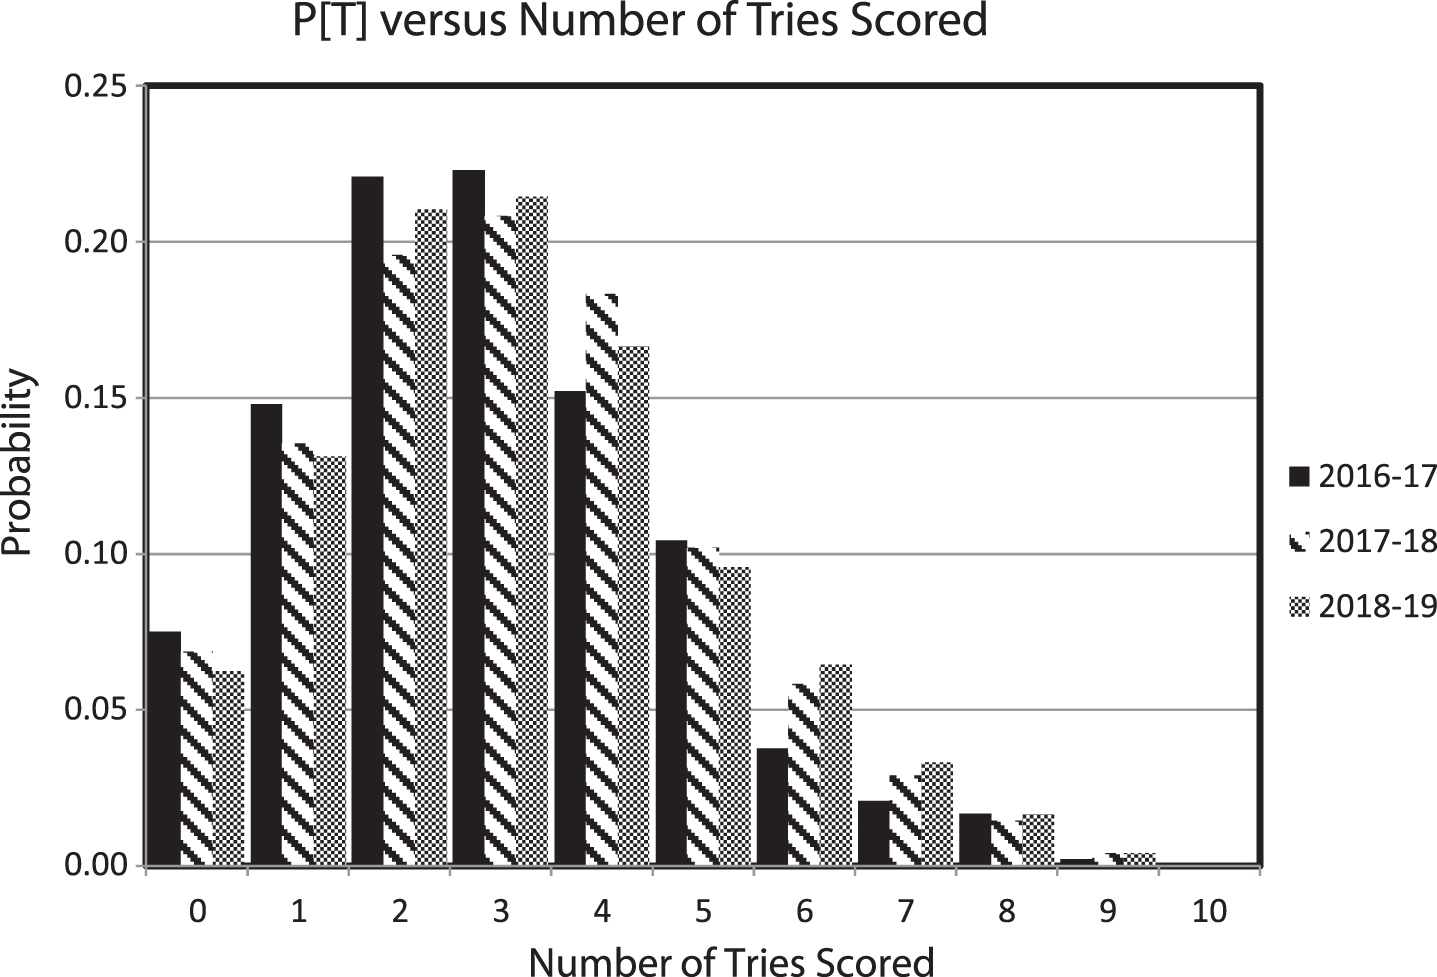 The proportion of the number of tries scored in each competition. The data are quite consistent year to year with equivalent modal values of 3. The mean value of the number of tries scored and the standard deviation and variance of the number of tries scored both increased slightly through time.